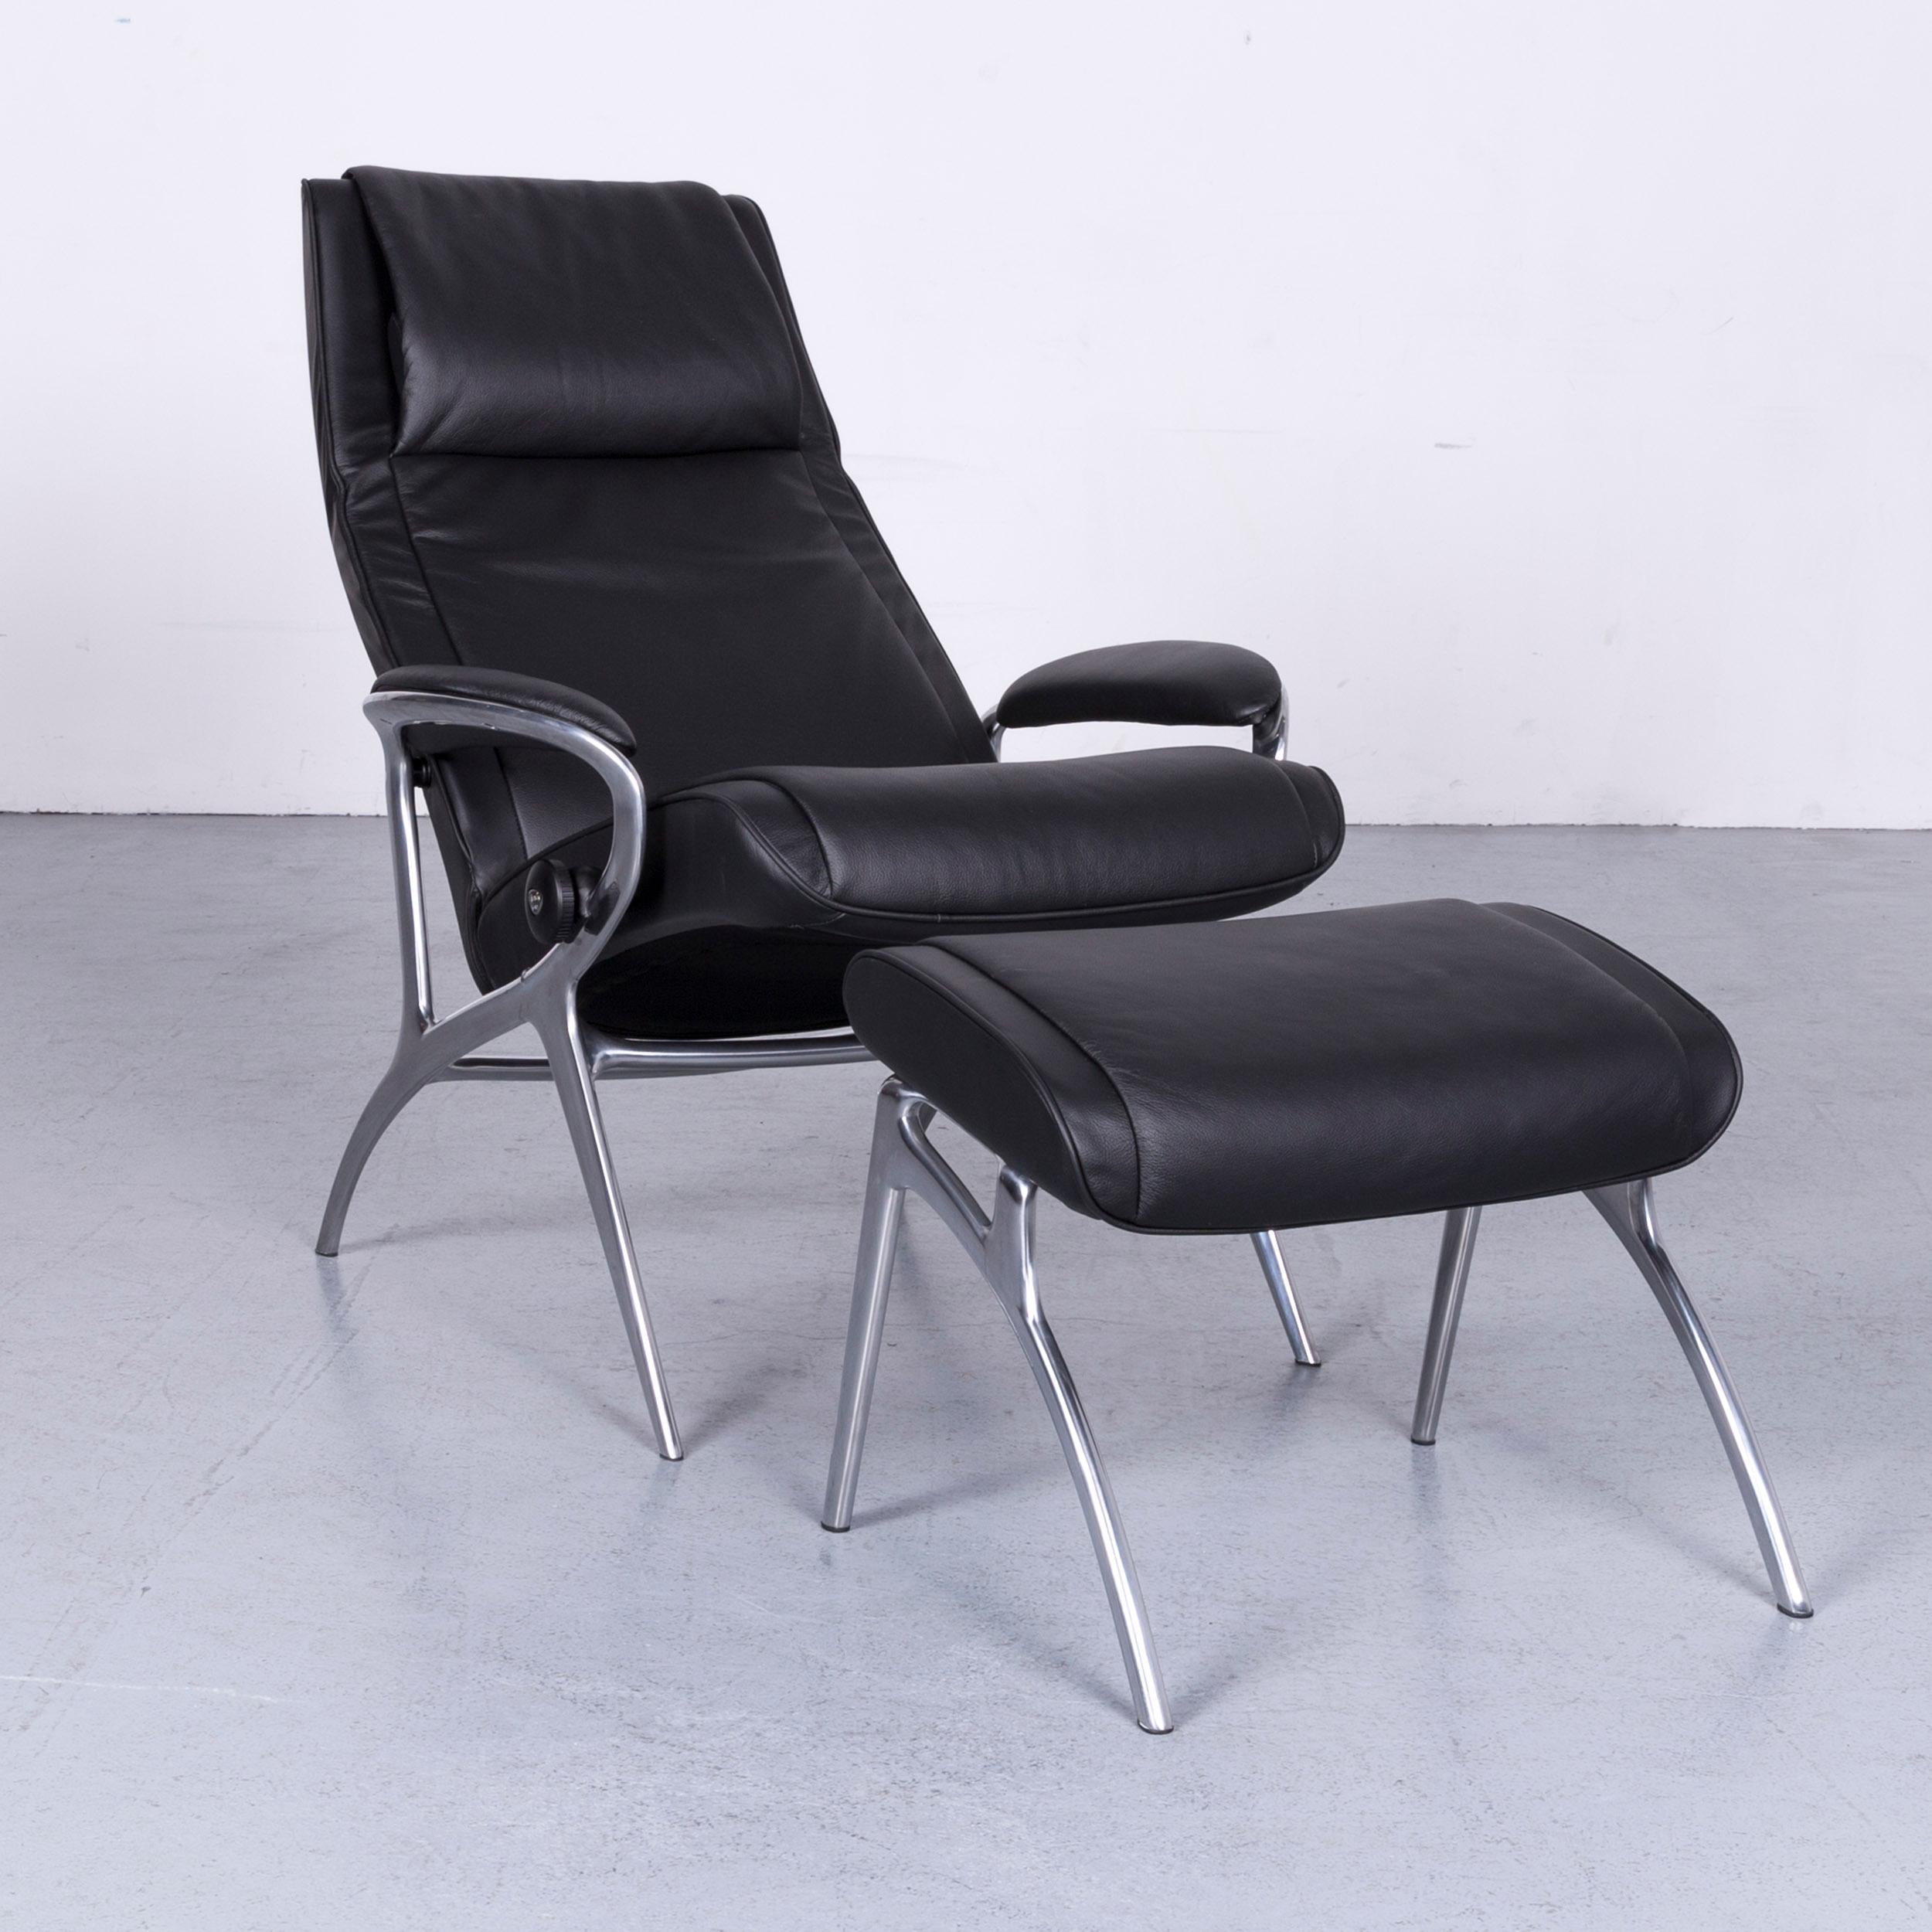 We bring to you an Stressless You James designer leather armchair with foot-stool in black.